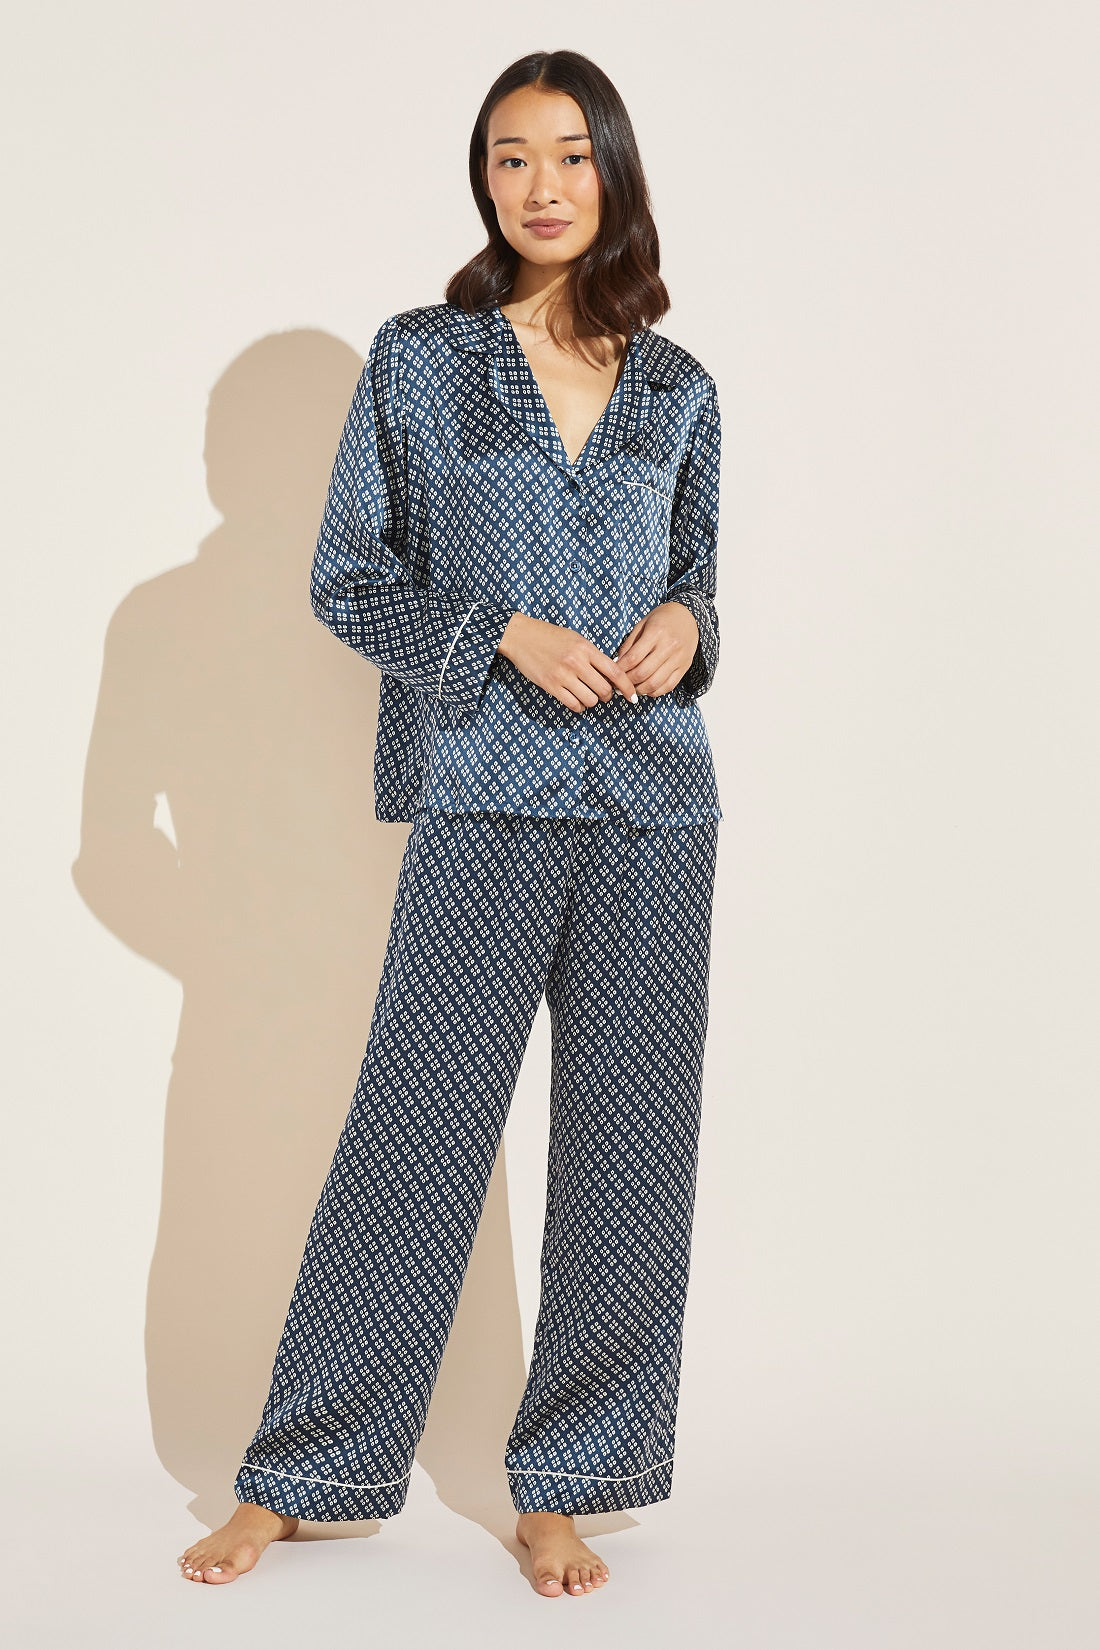 Eberjey - Pajamas that double as your dinner outfit. #mysoftside